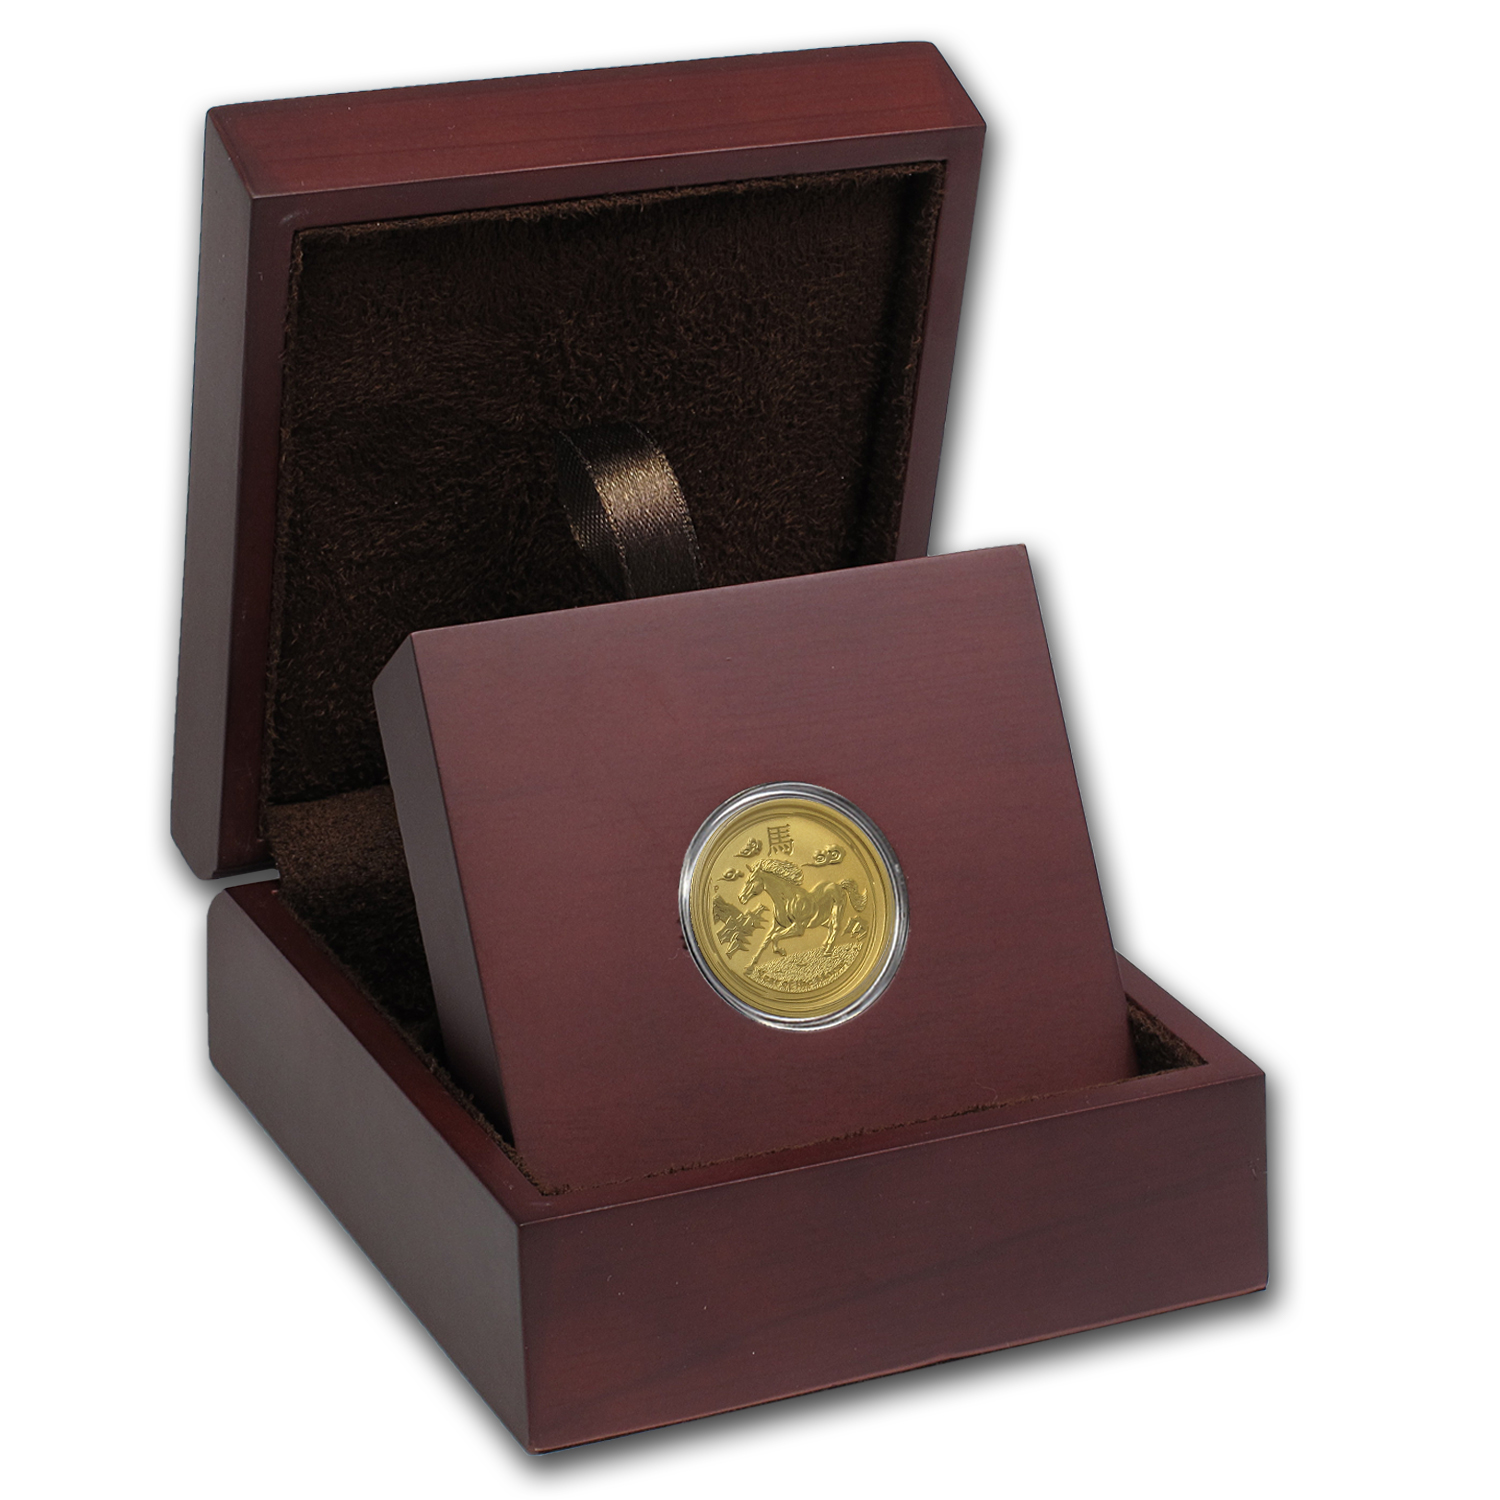 Gold coins in a gift box stock illustration. Illustration of bill - 36075605